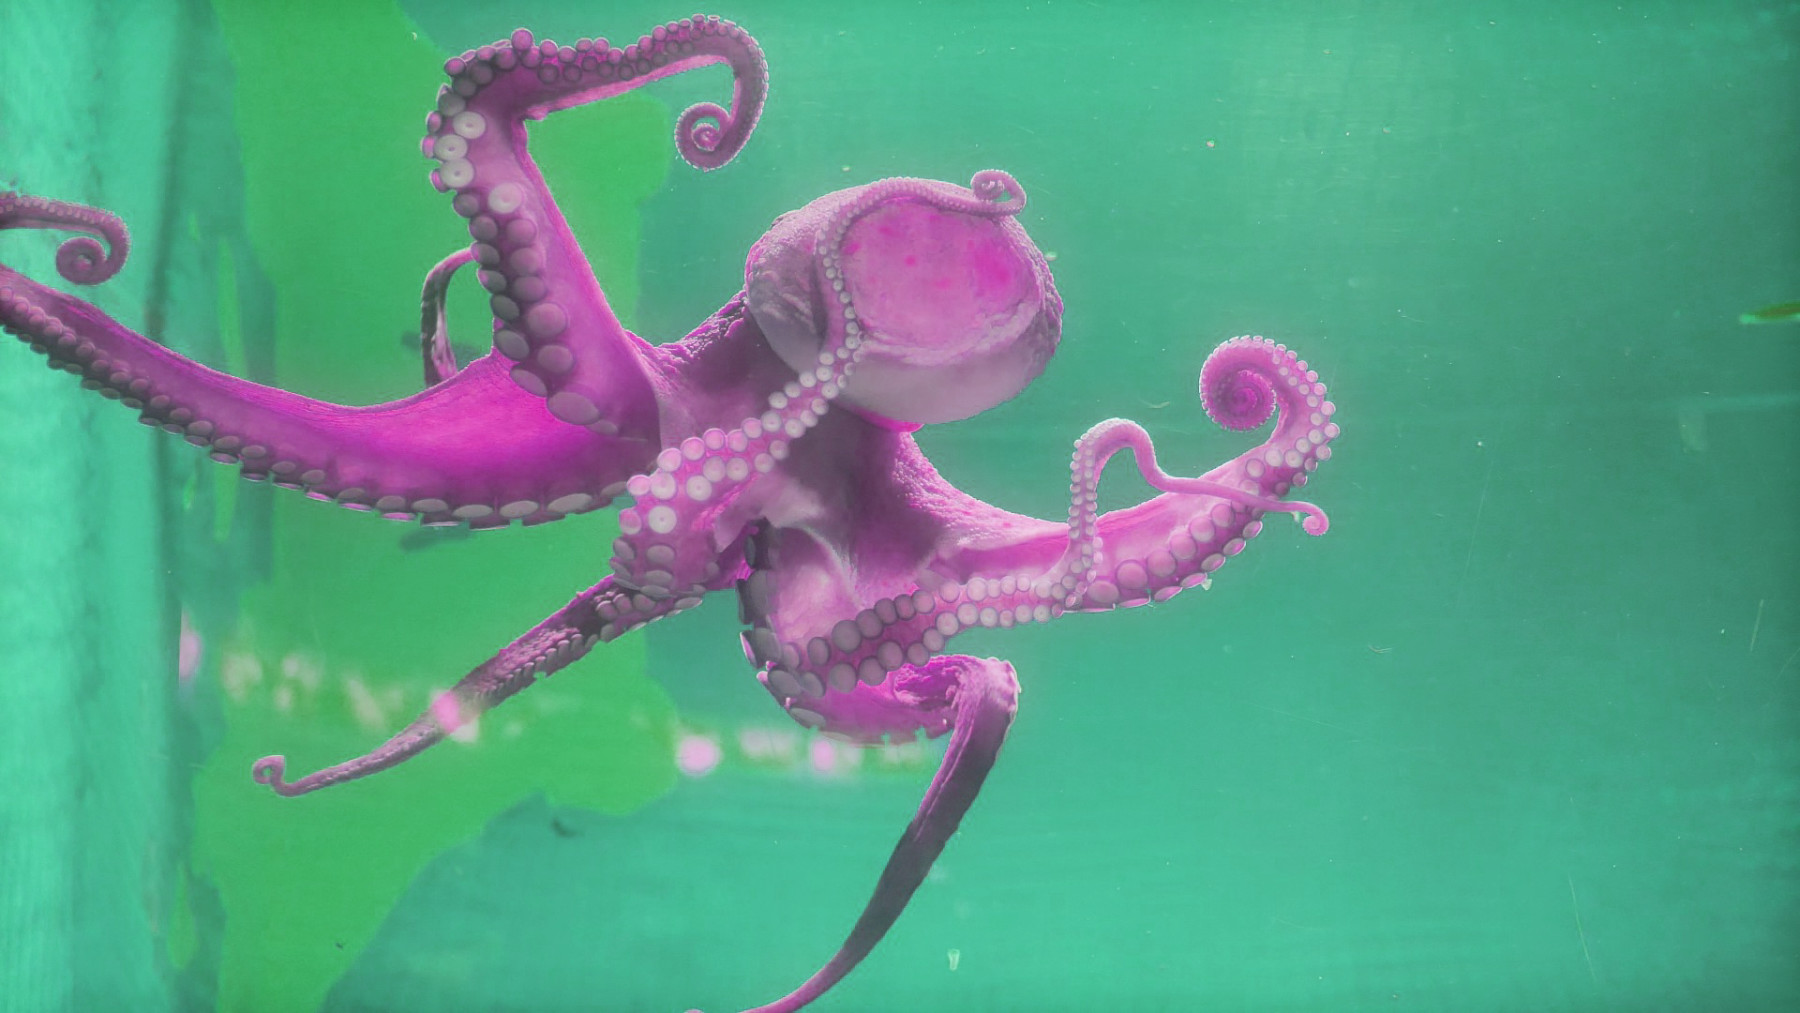 A purple octopus swims past a green background.